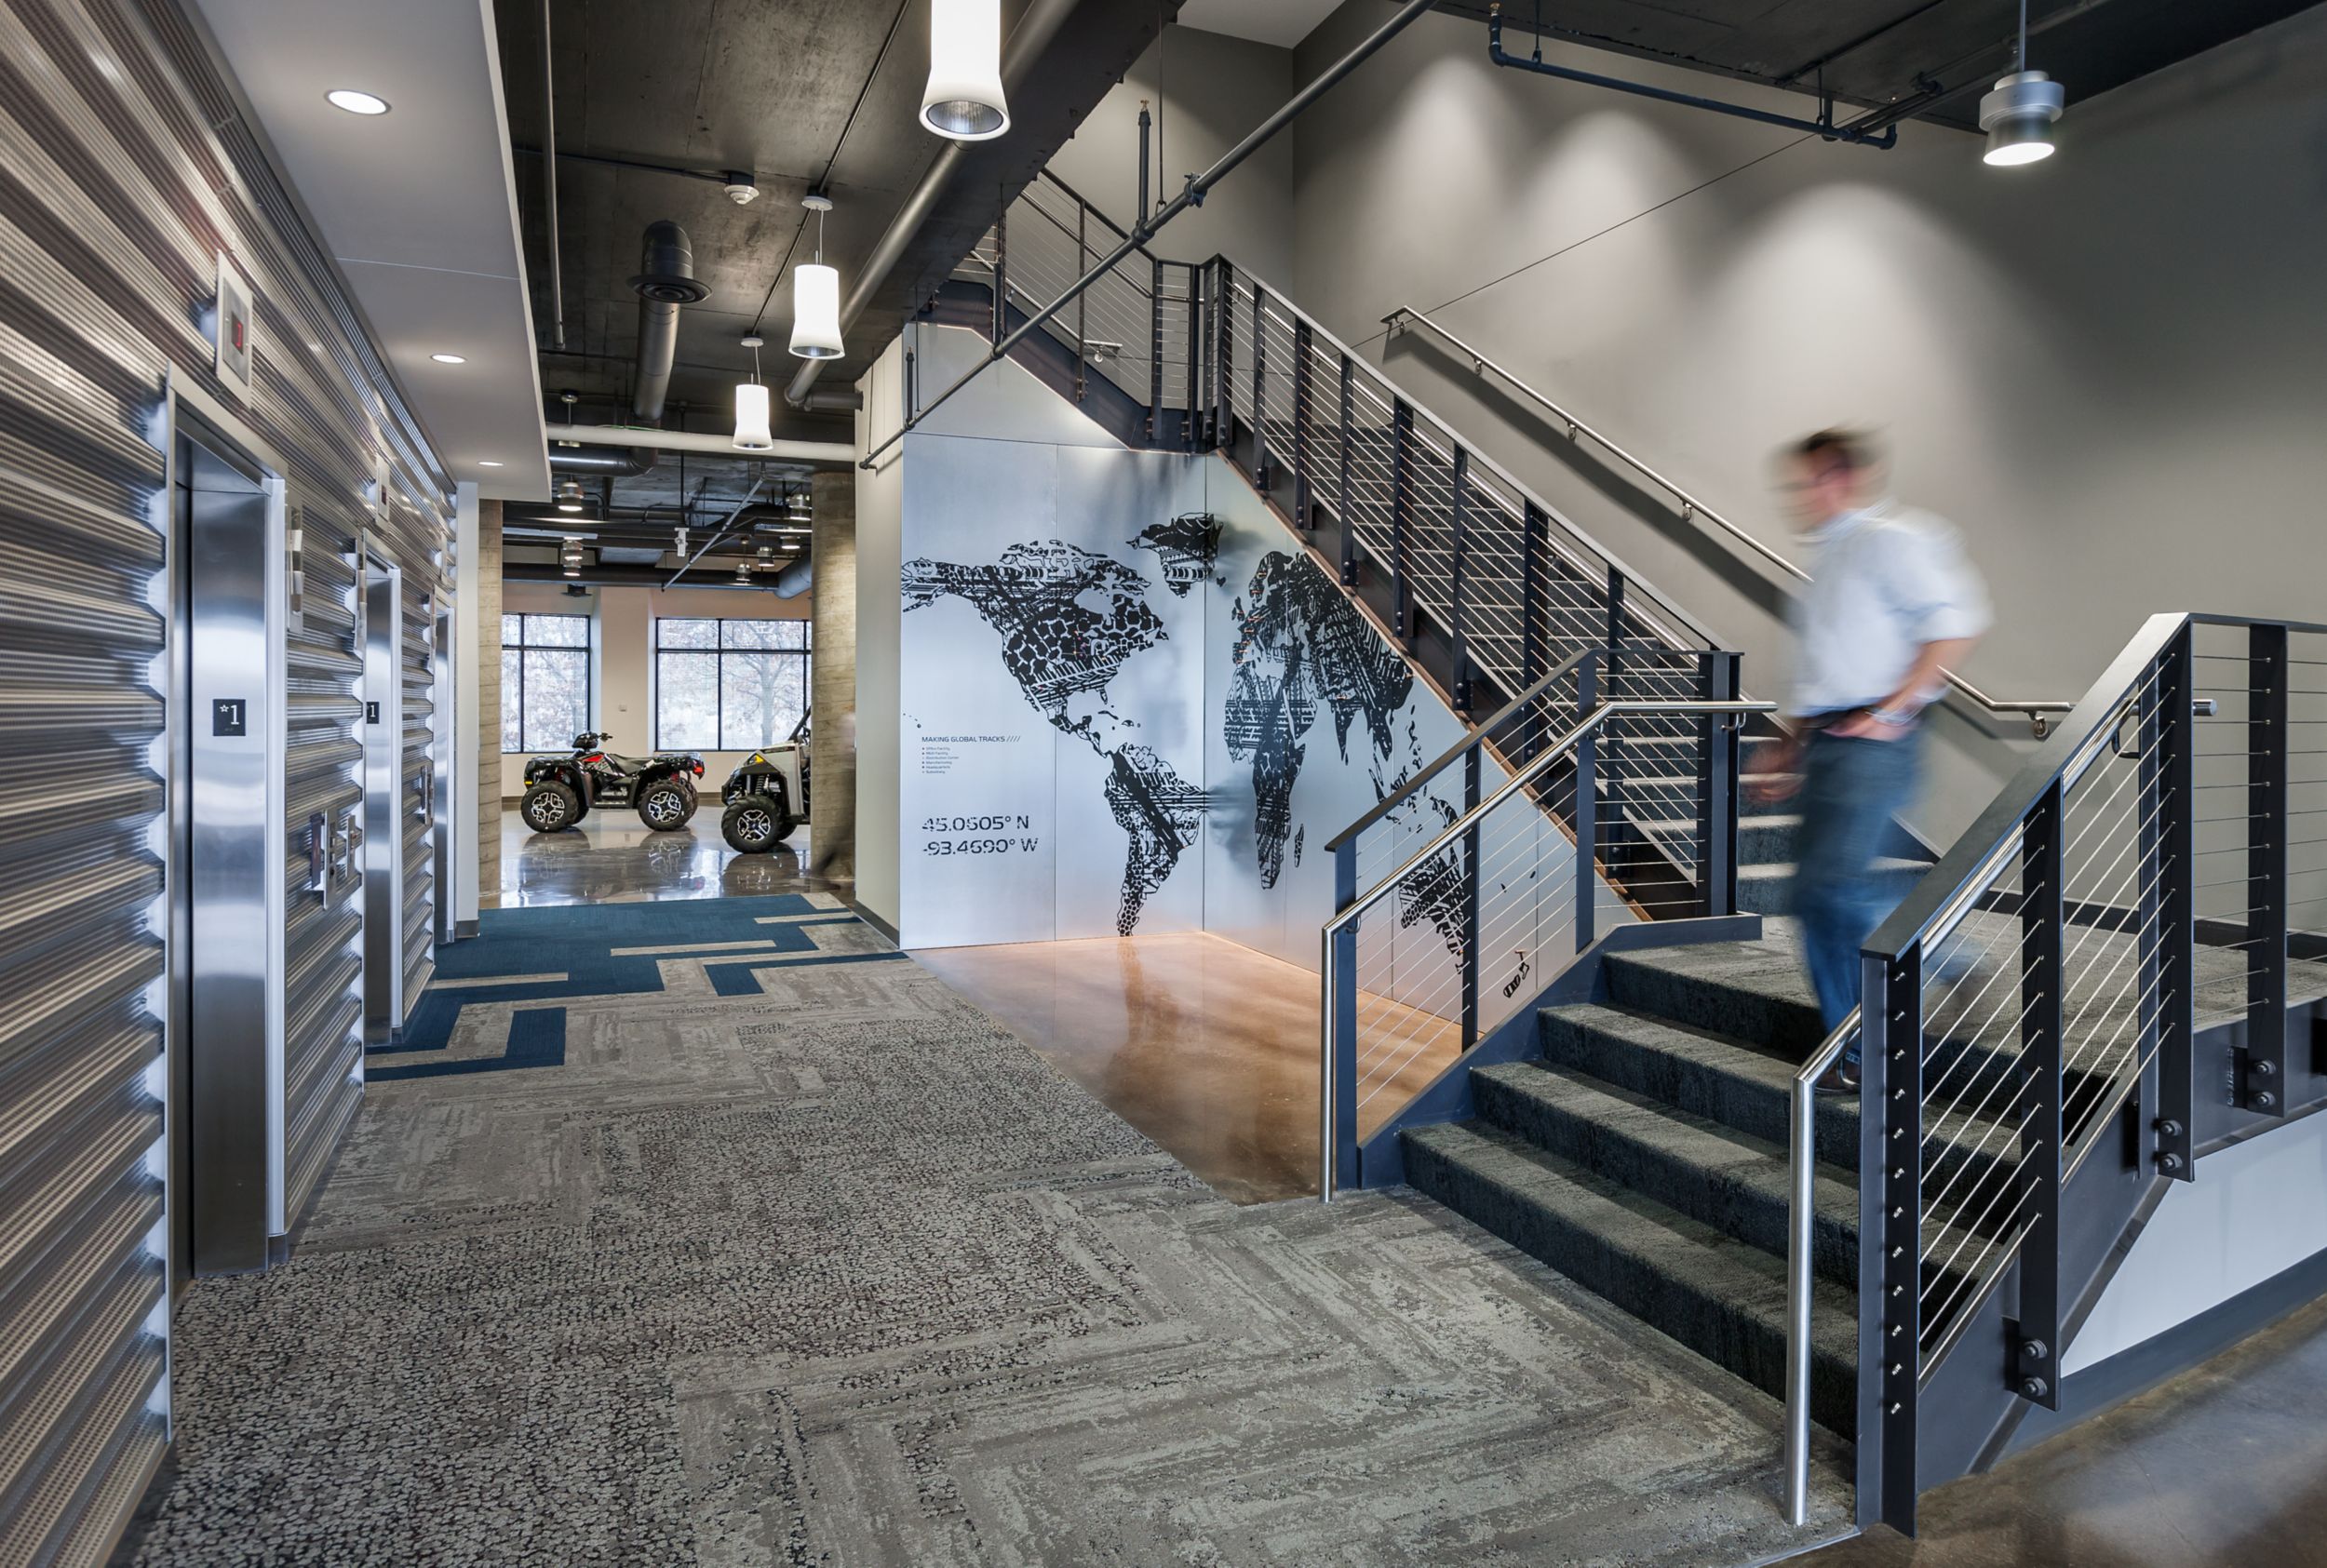 Interface HN810, HN820, HN840 and HN850 plank carpet tiles in open stairwell with four wheelers in background at Polaris Industries image number 9